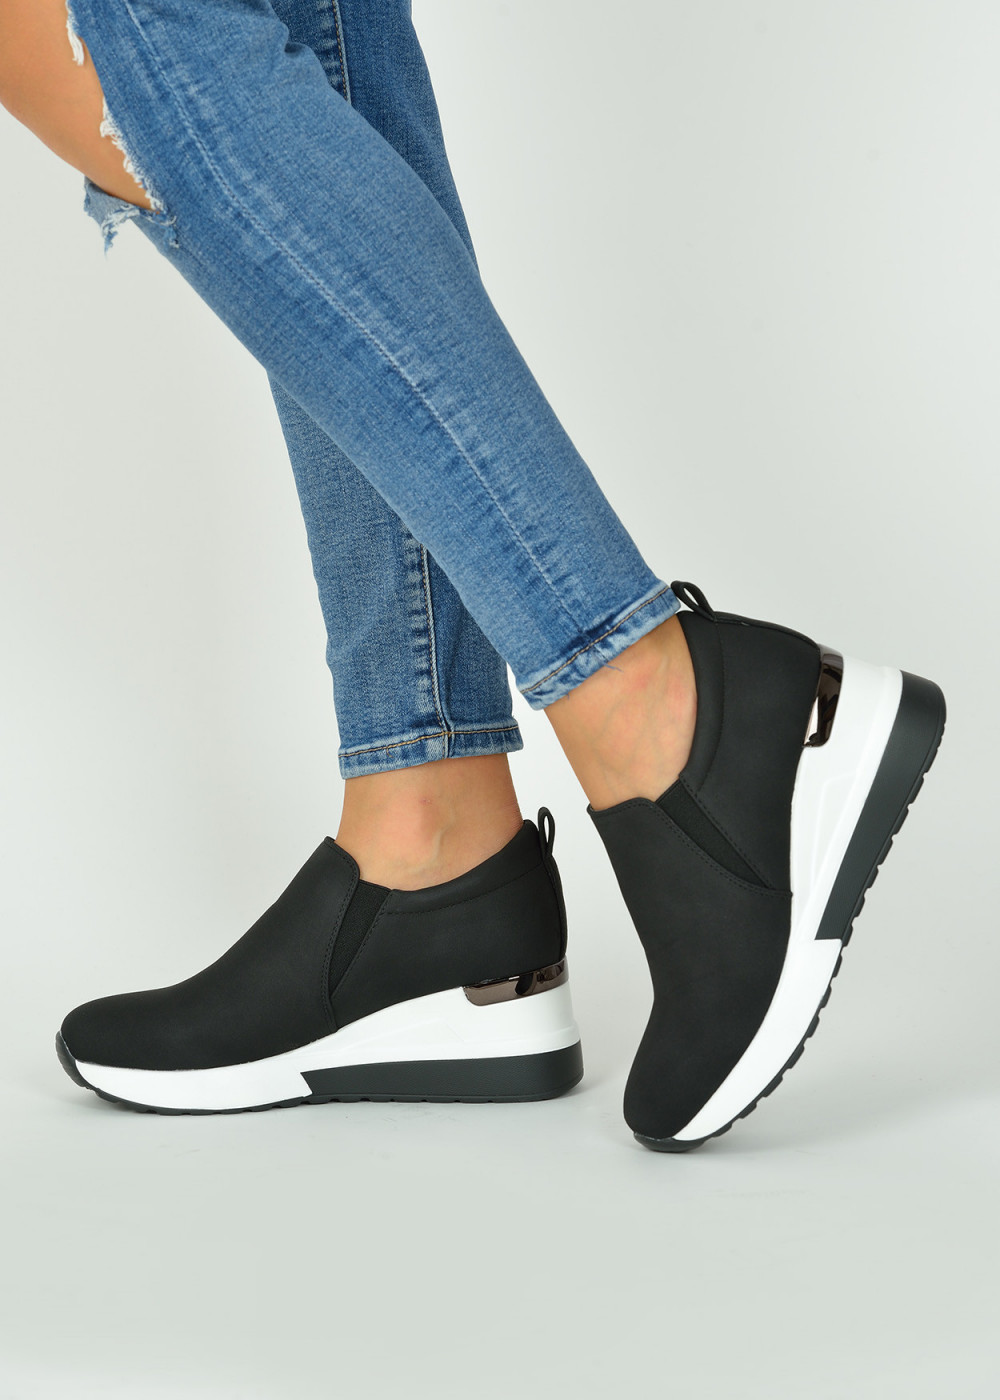 Womens High Top Vulcanized Dressy Wedge Shoes 2022 Autumn/Winter Wedge  Shoes With Zipper, Chunky Sneakers, And Plus Size Options T230826 From  Sts_016, $2.66 | DHgate.Com